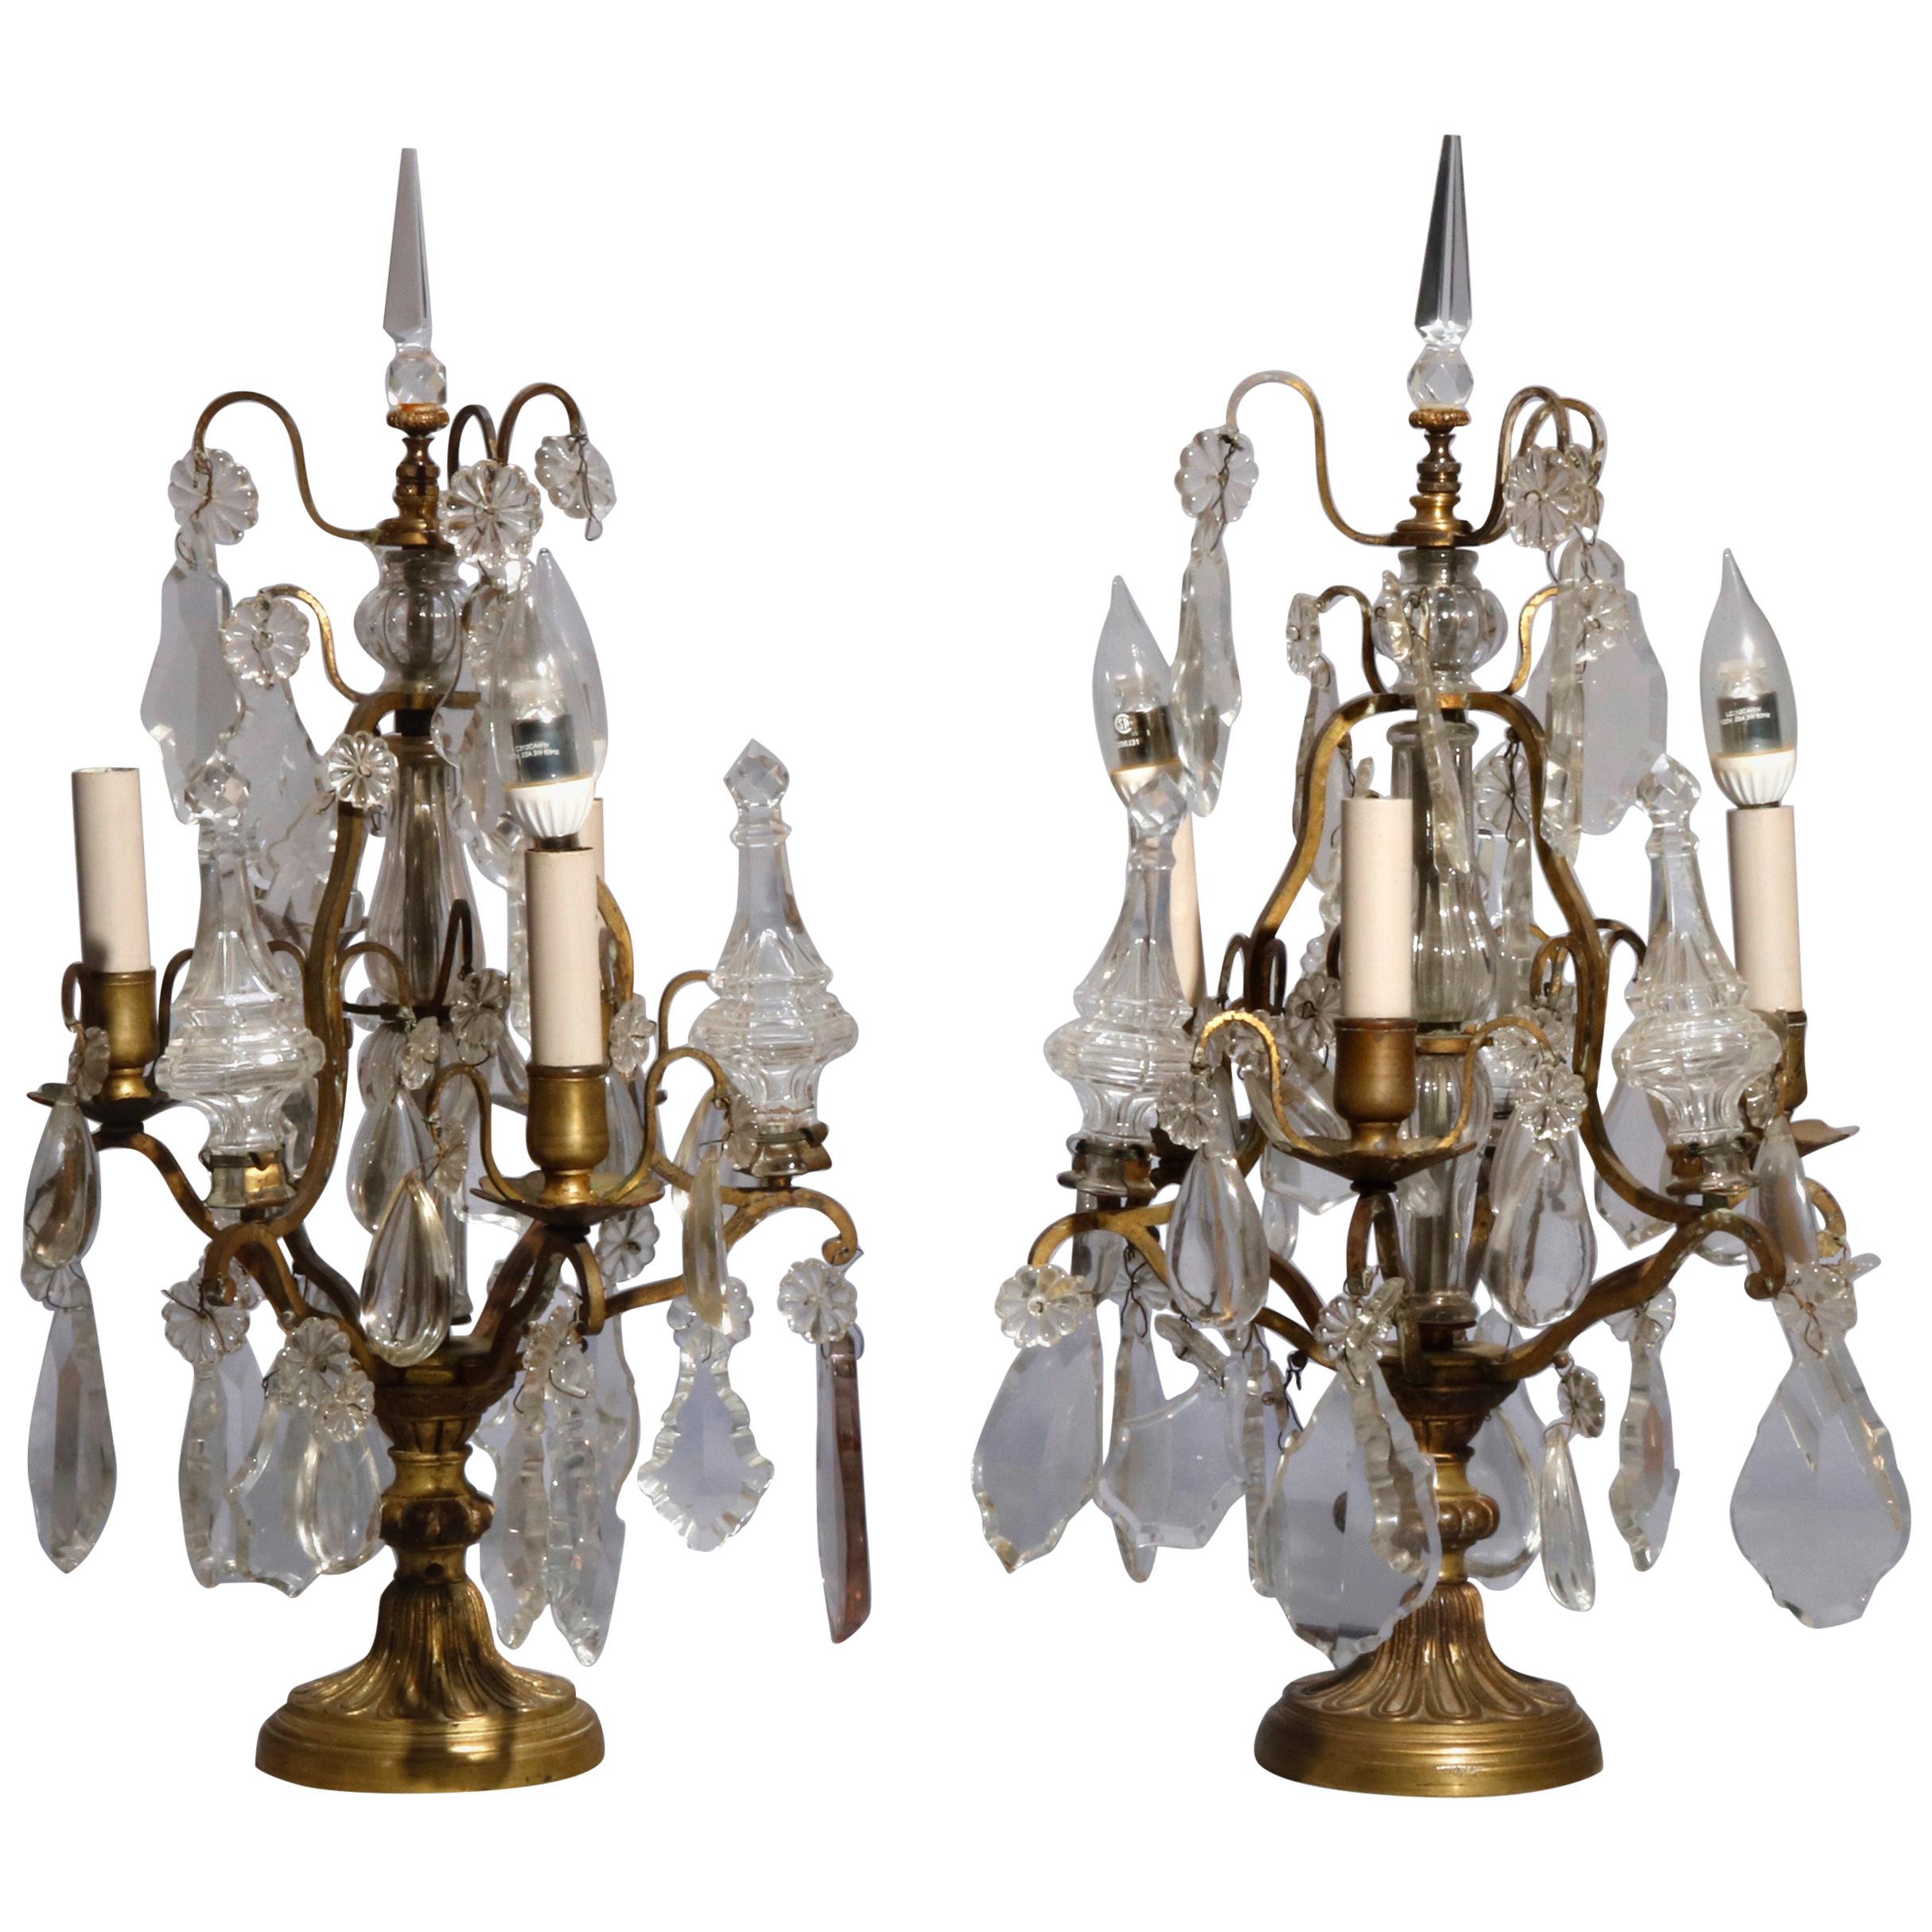 Antique Pair of French Bronzed Crystal Candelabras Lamps, circa 1910